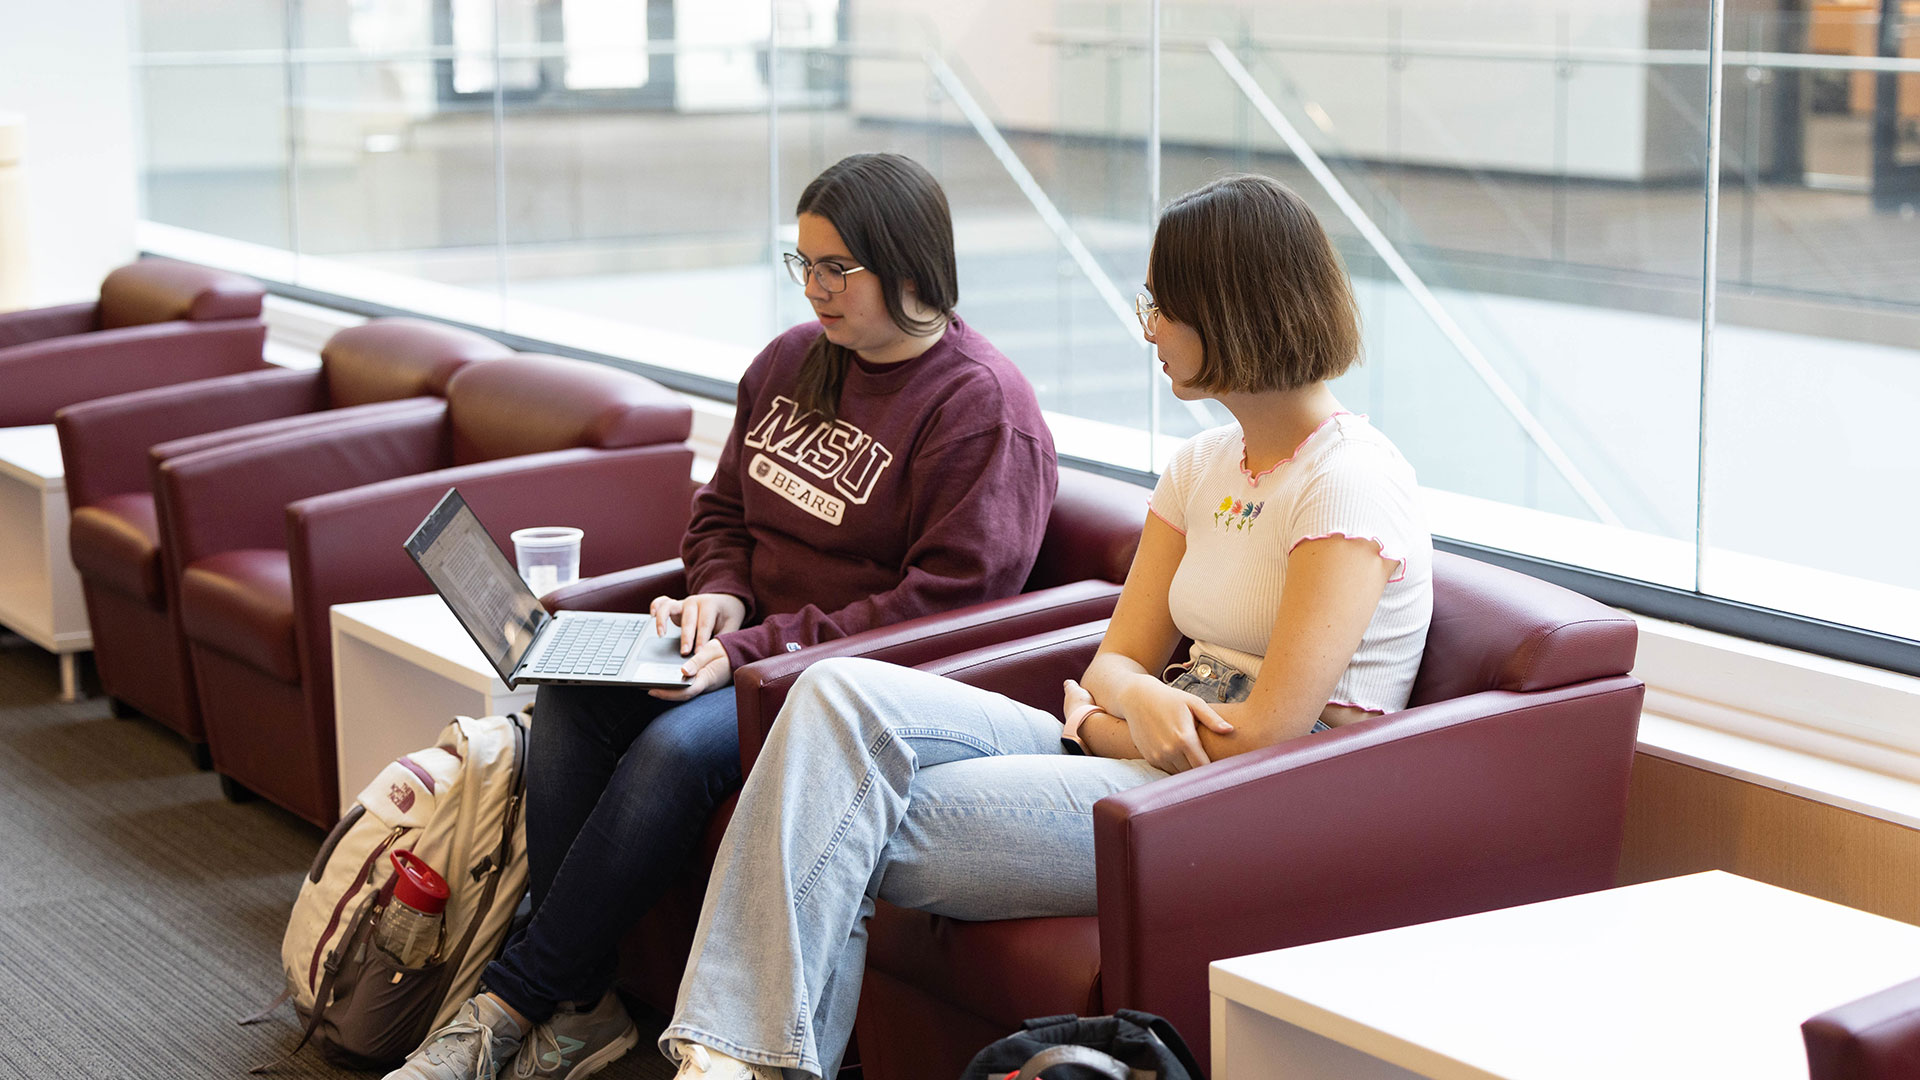 Two Missouri State students are focused on a laptop screen.